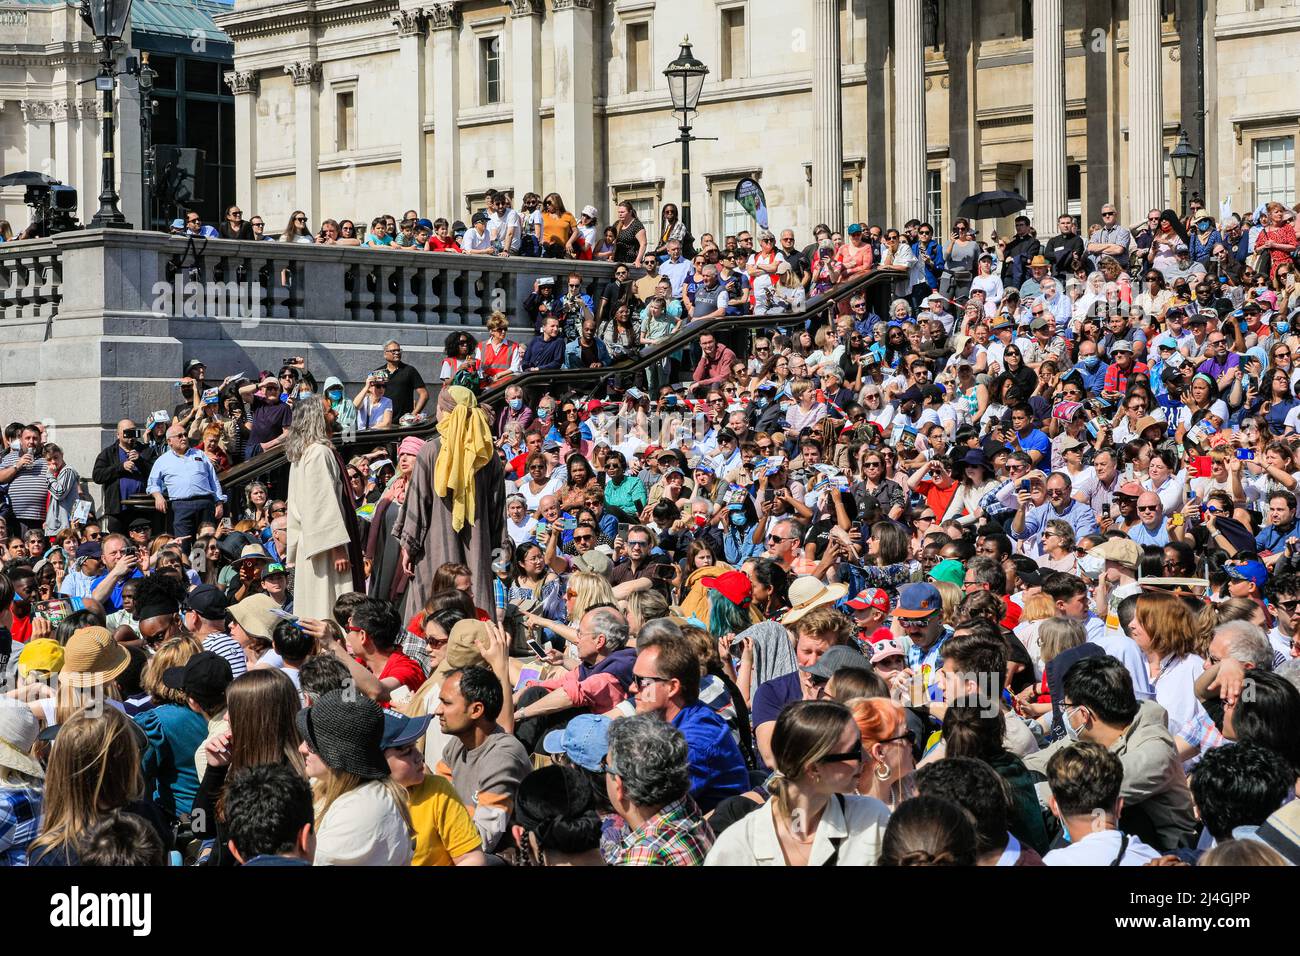 Trafalgar Square, London, UK. 15th Apr, 2022. Jesus walks through the crowd. The annual "Passion of Jesus" play sees around a hundred Wintershall players bring their portrayal of the final days of Jesus to on Trafalgar Square for the Christian Good Friday holiday. The beautiful sunny weather means the square is packed with spectators. Credit: Imageplotter/Alamy Live News Stock Photo